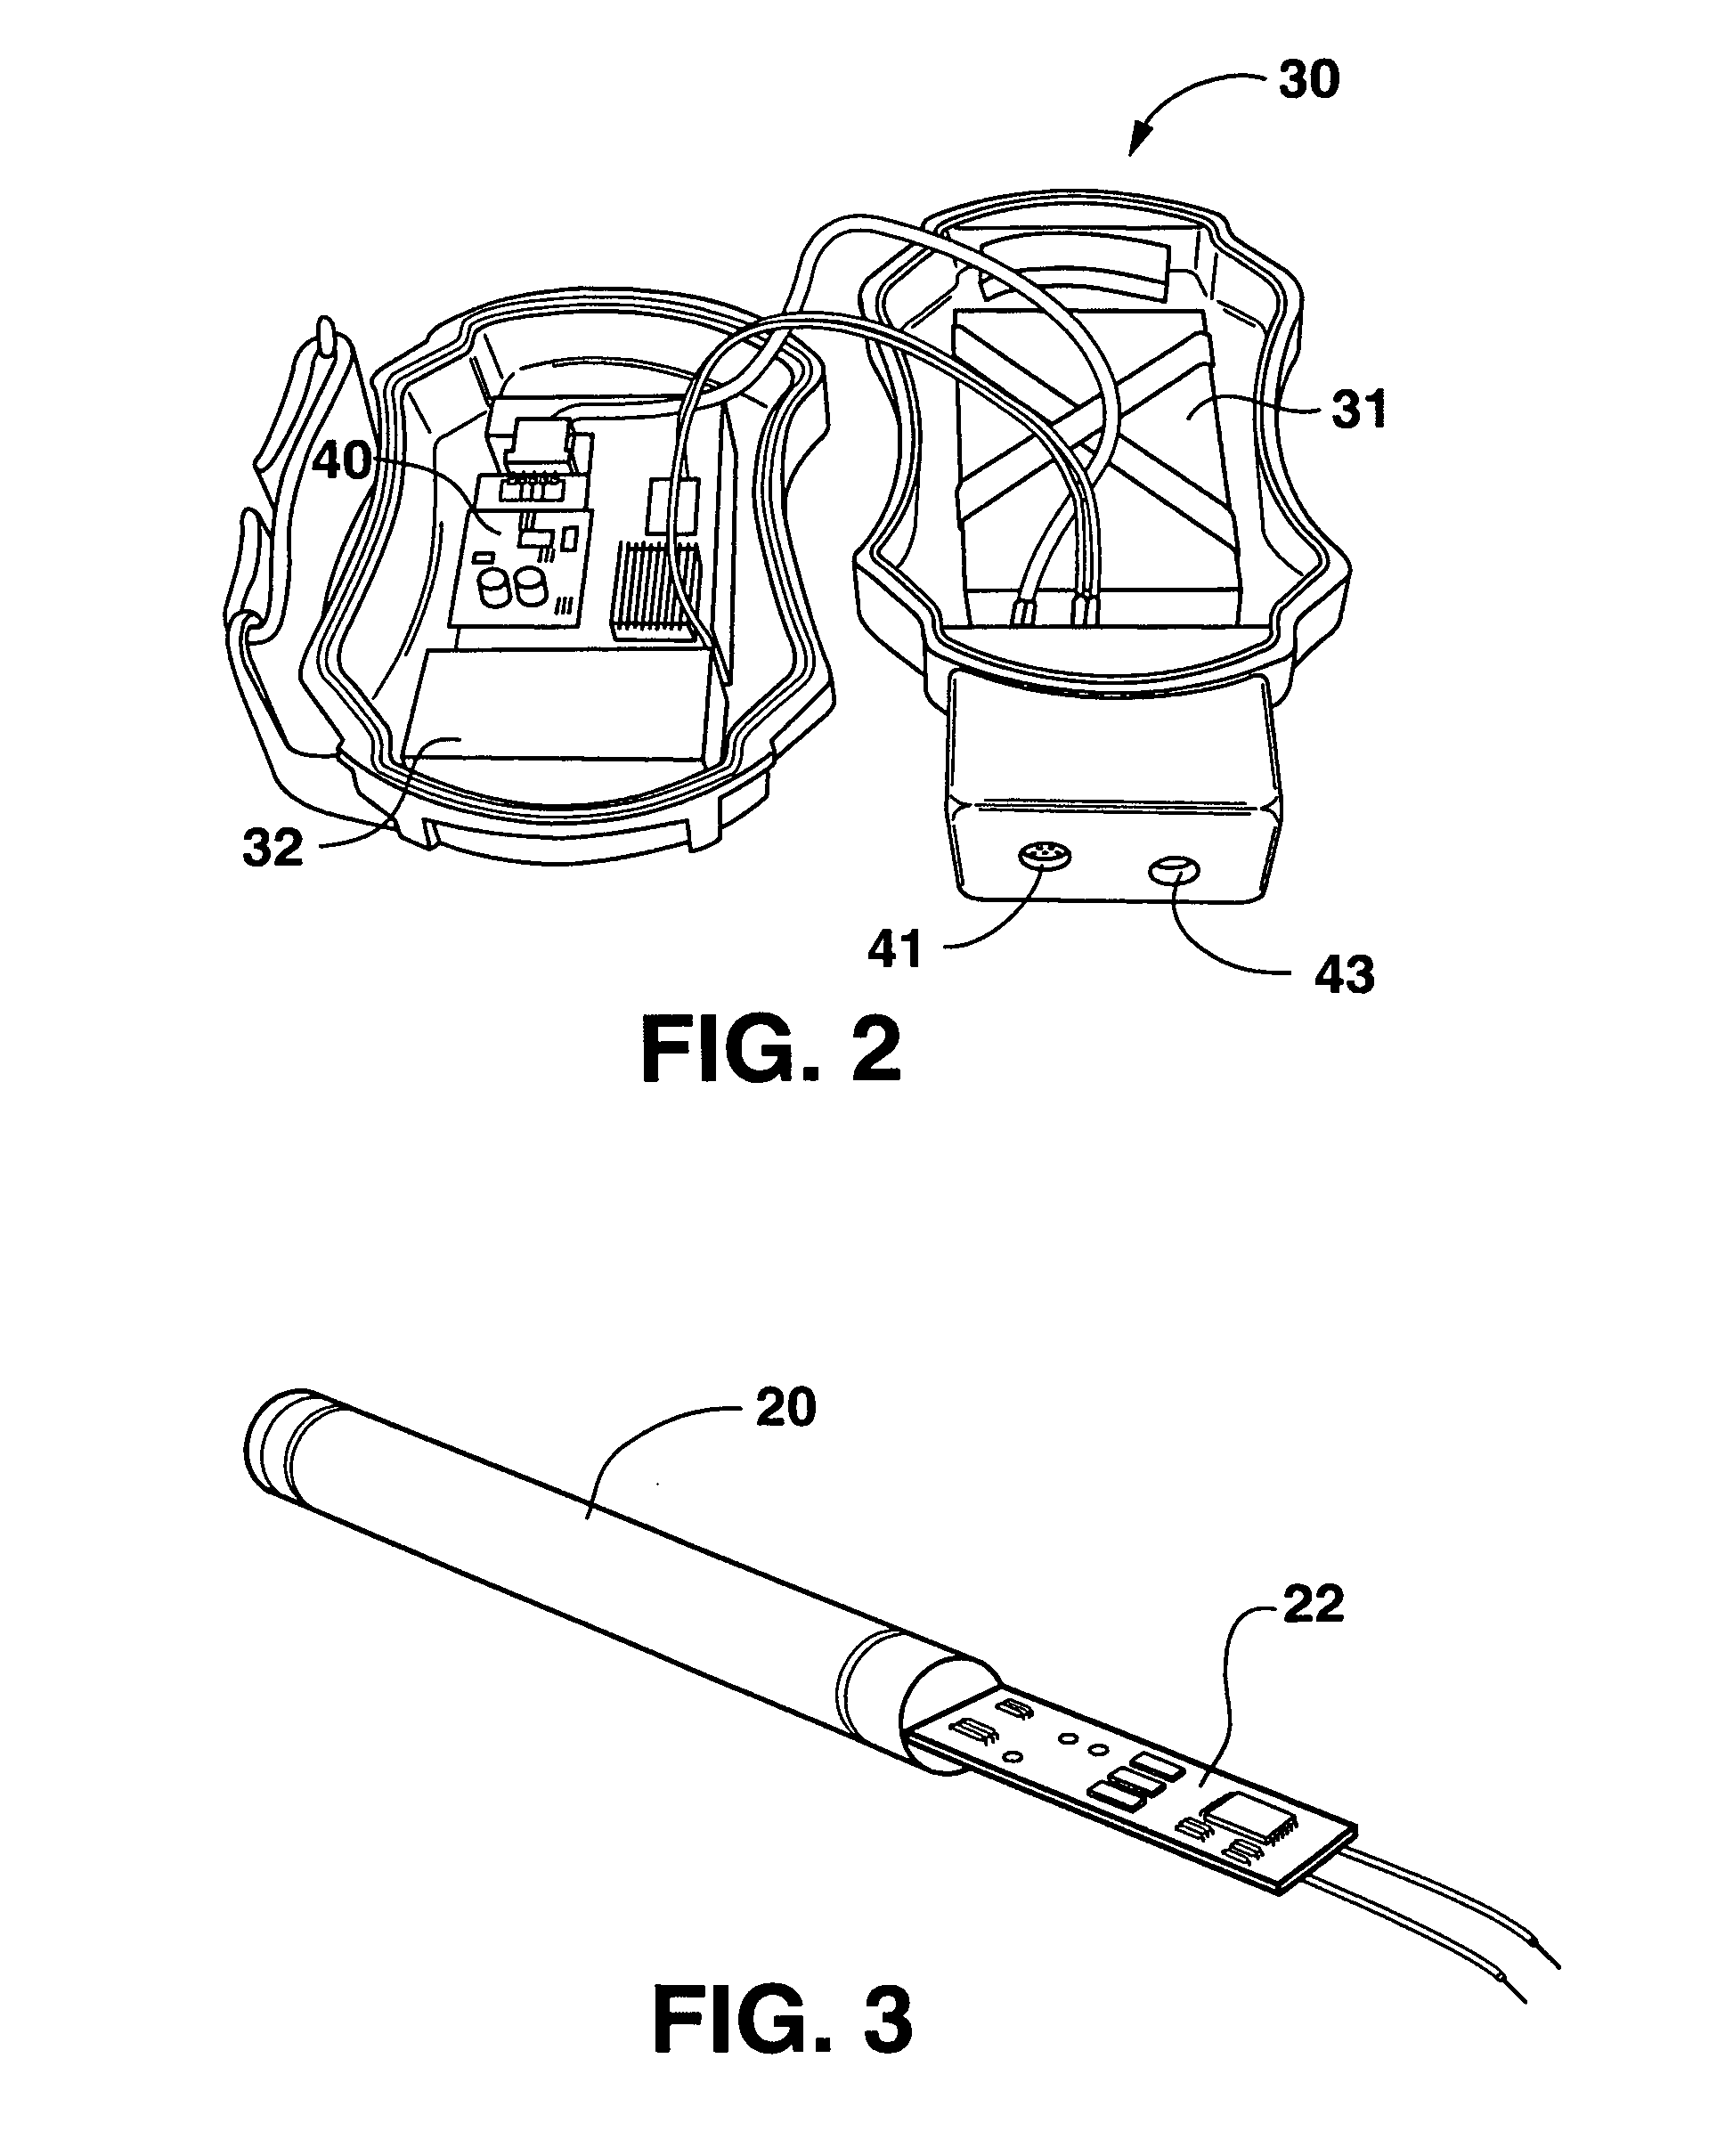 Portable nuclear material detector and process